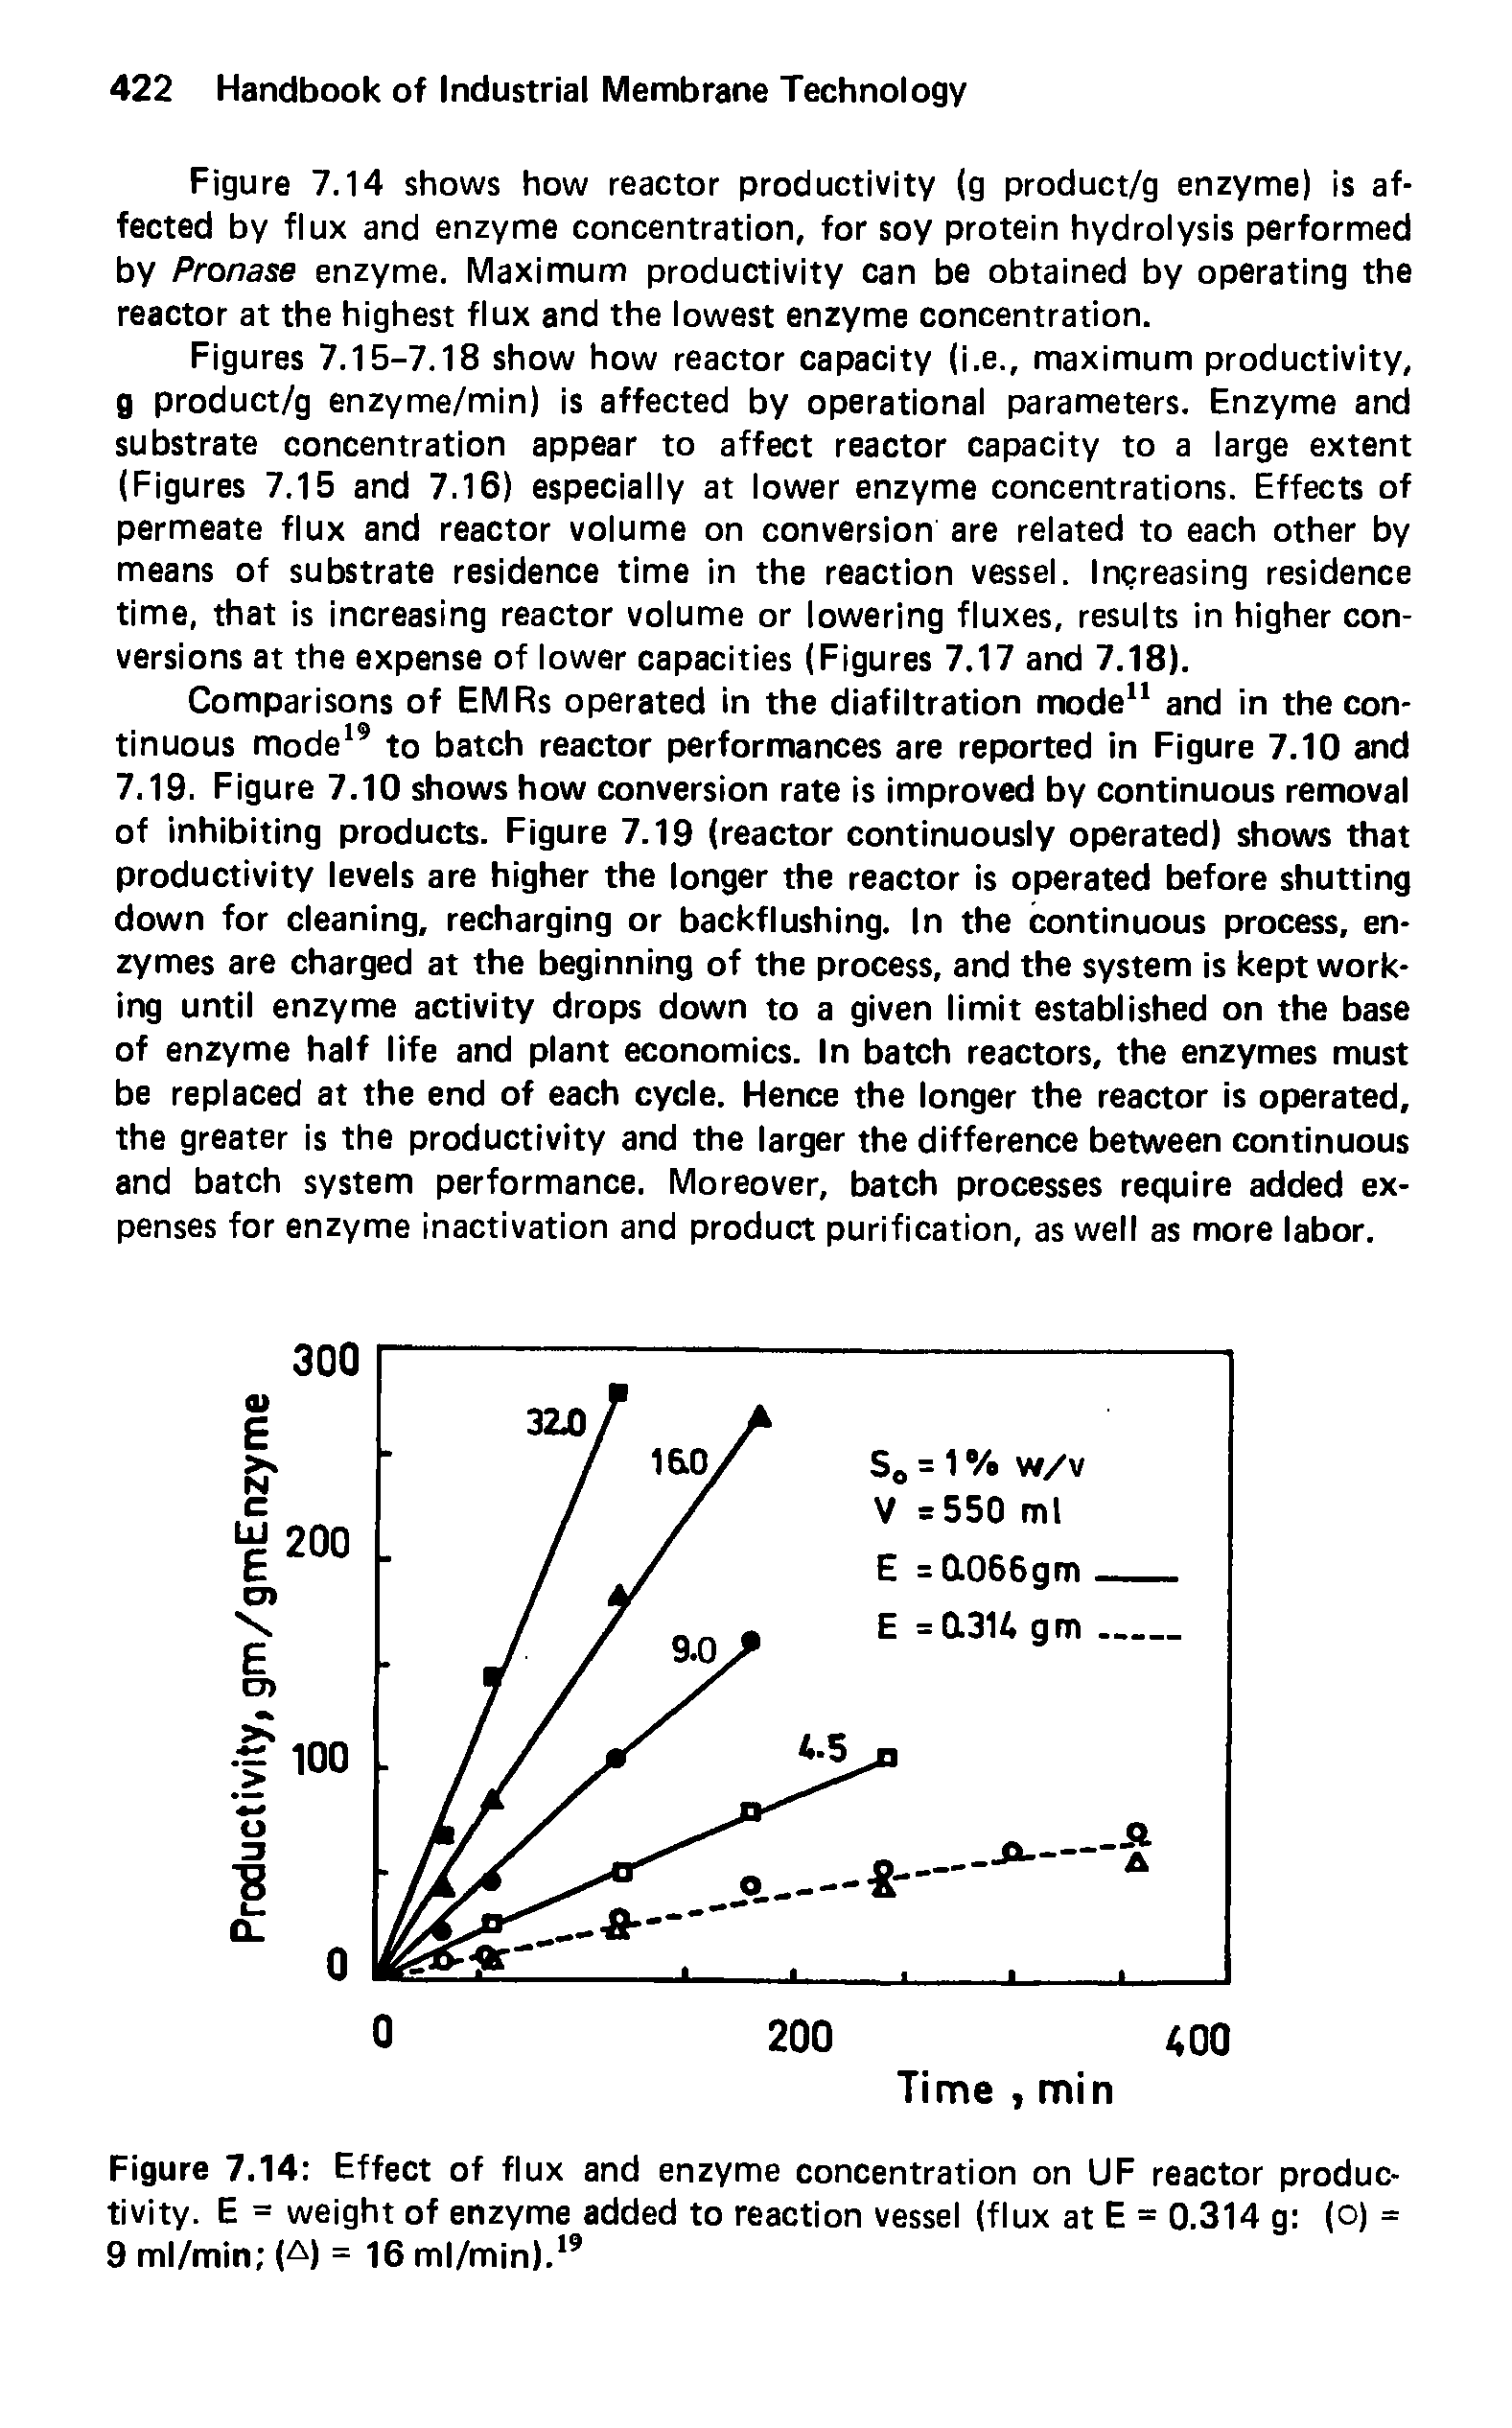 Figures 7.15-7.18 show how reactor capacity (i.e., maximum productivity, g product/g enzyme/min) is affected by operational parameters. Enzyme and substrate concentration appear to affect reactor capacity to a large extent (Figures 7.15 and 7.16) especially at lower enzyme concentrations. Effects of permeate flux and reactor volume on conversion are related to each other by means of substrate residence time in the reaction vessel. Ingreasing residence time, that is increasing reactor volume or lowering fluxes, results in higher conversions at the expense of lower capacities (Figures 7.17 and 7.18).